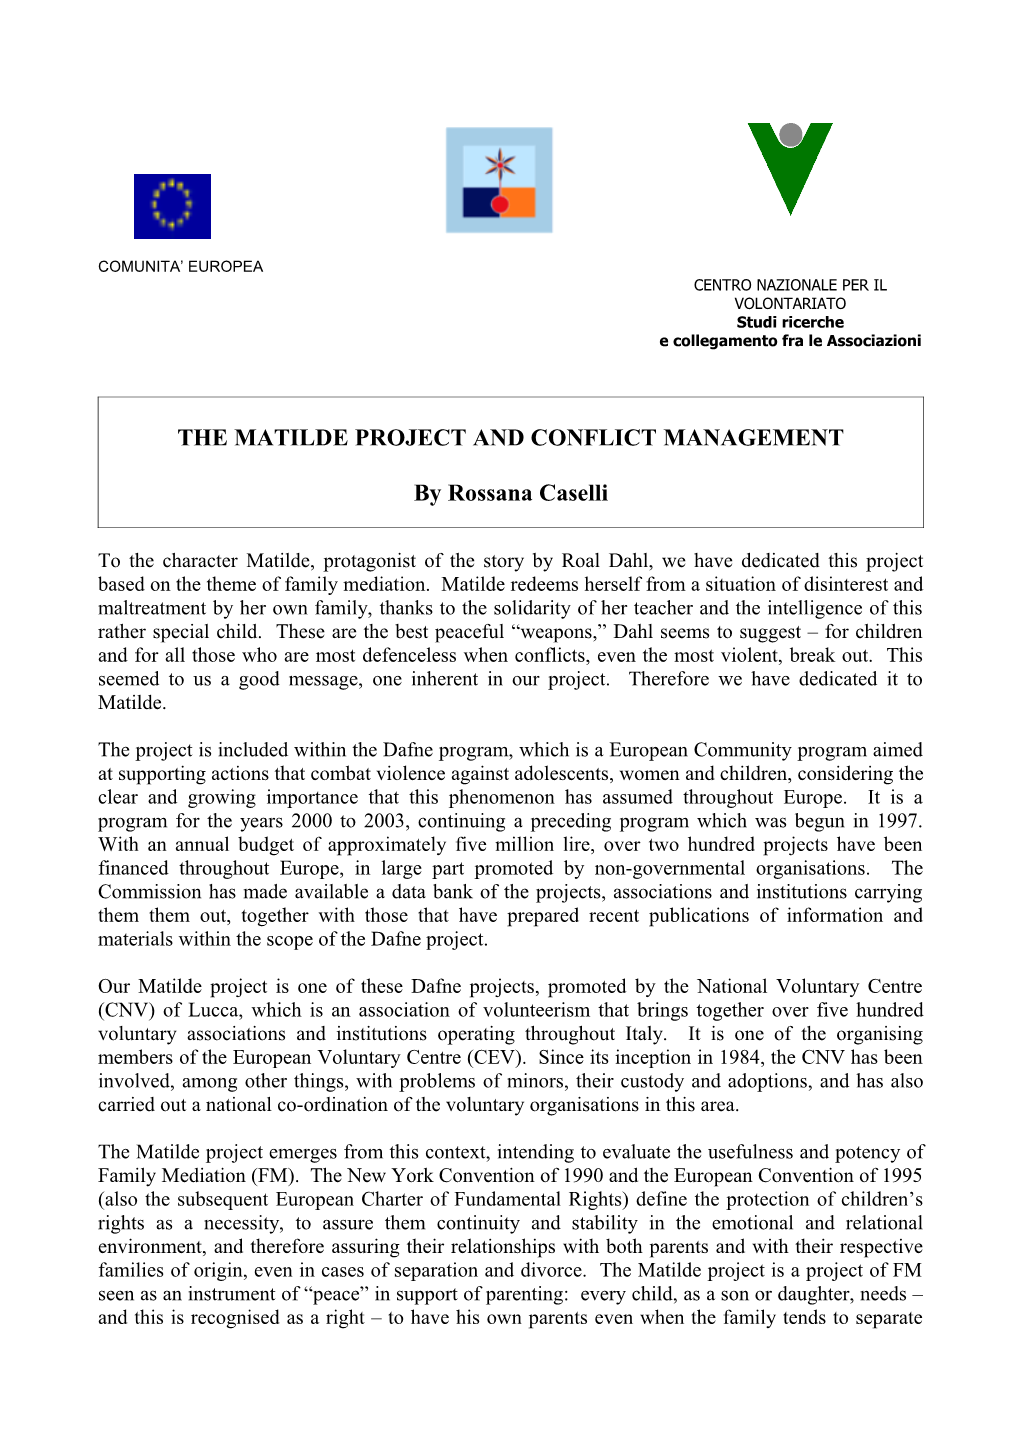 The Matilde Project and Conflict Management